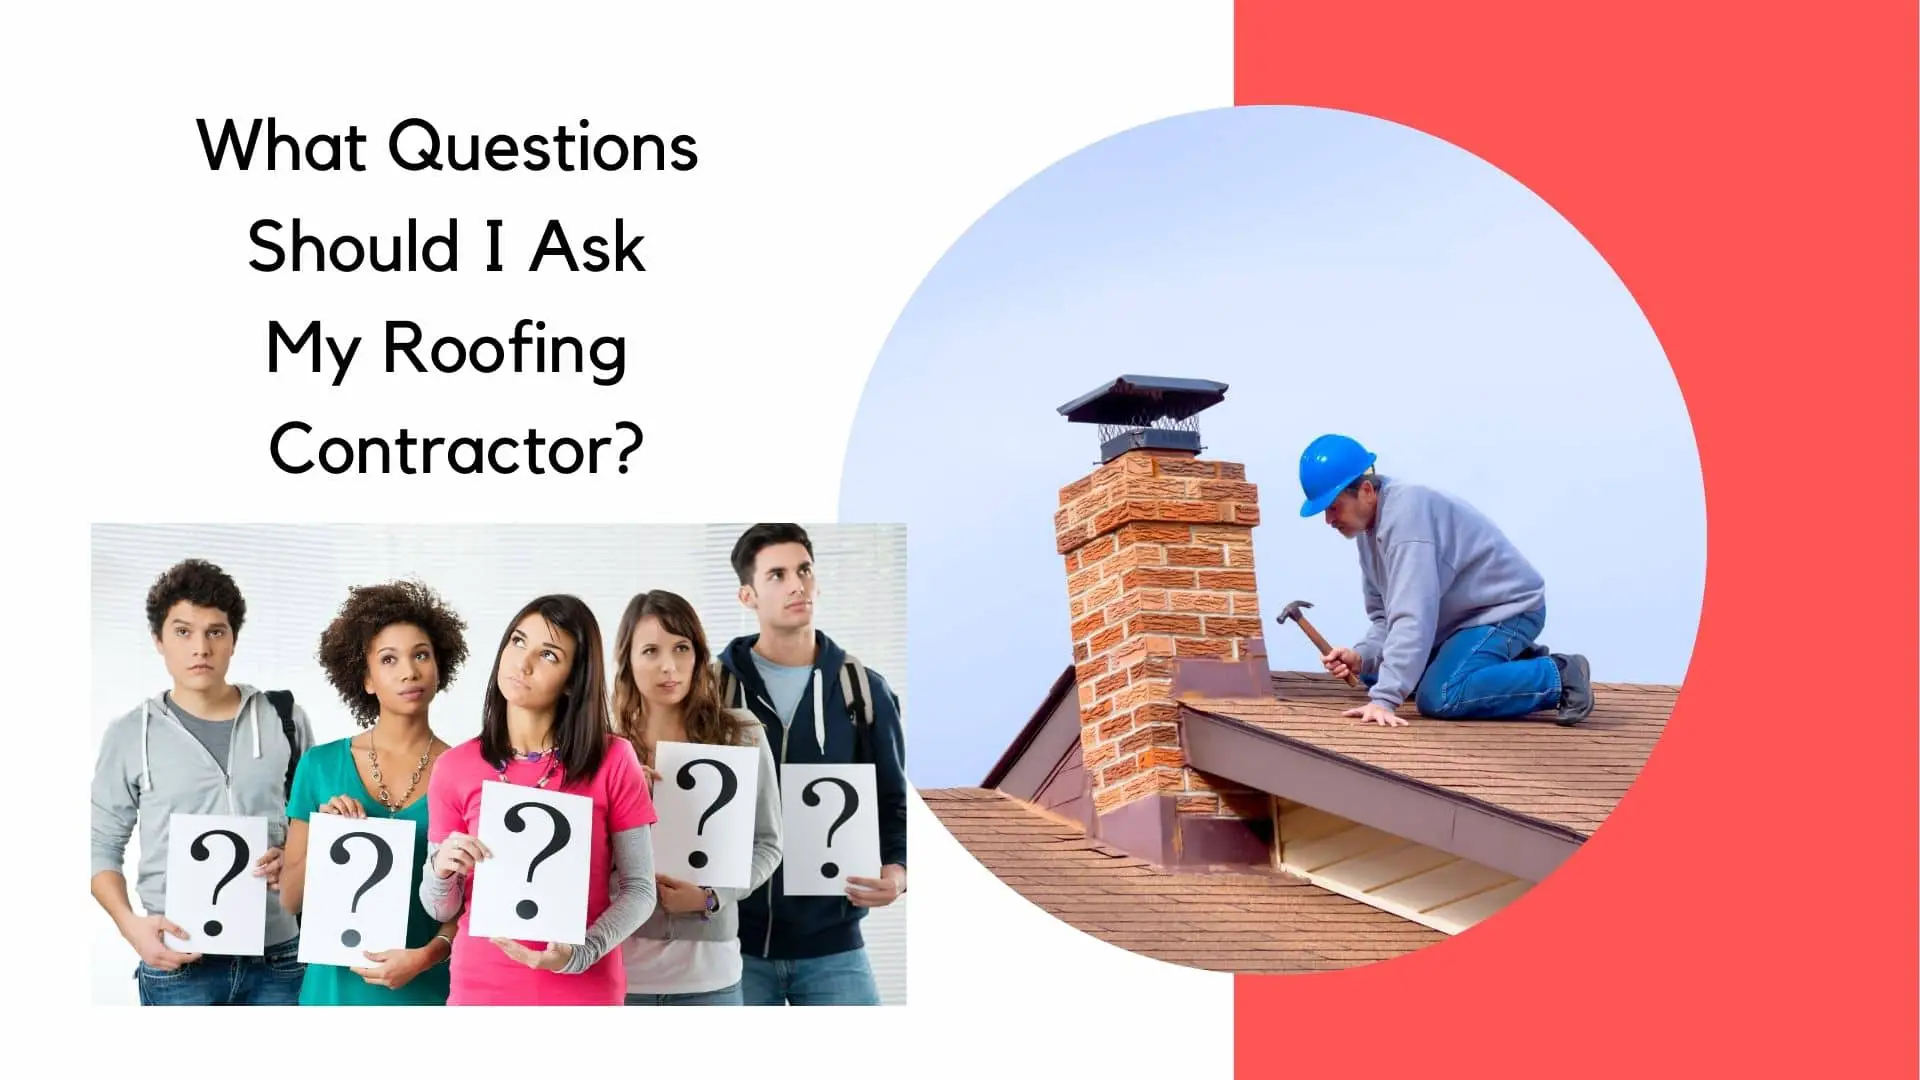 What Questions Should I Ask My Roofing Contractor?